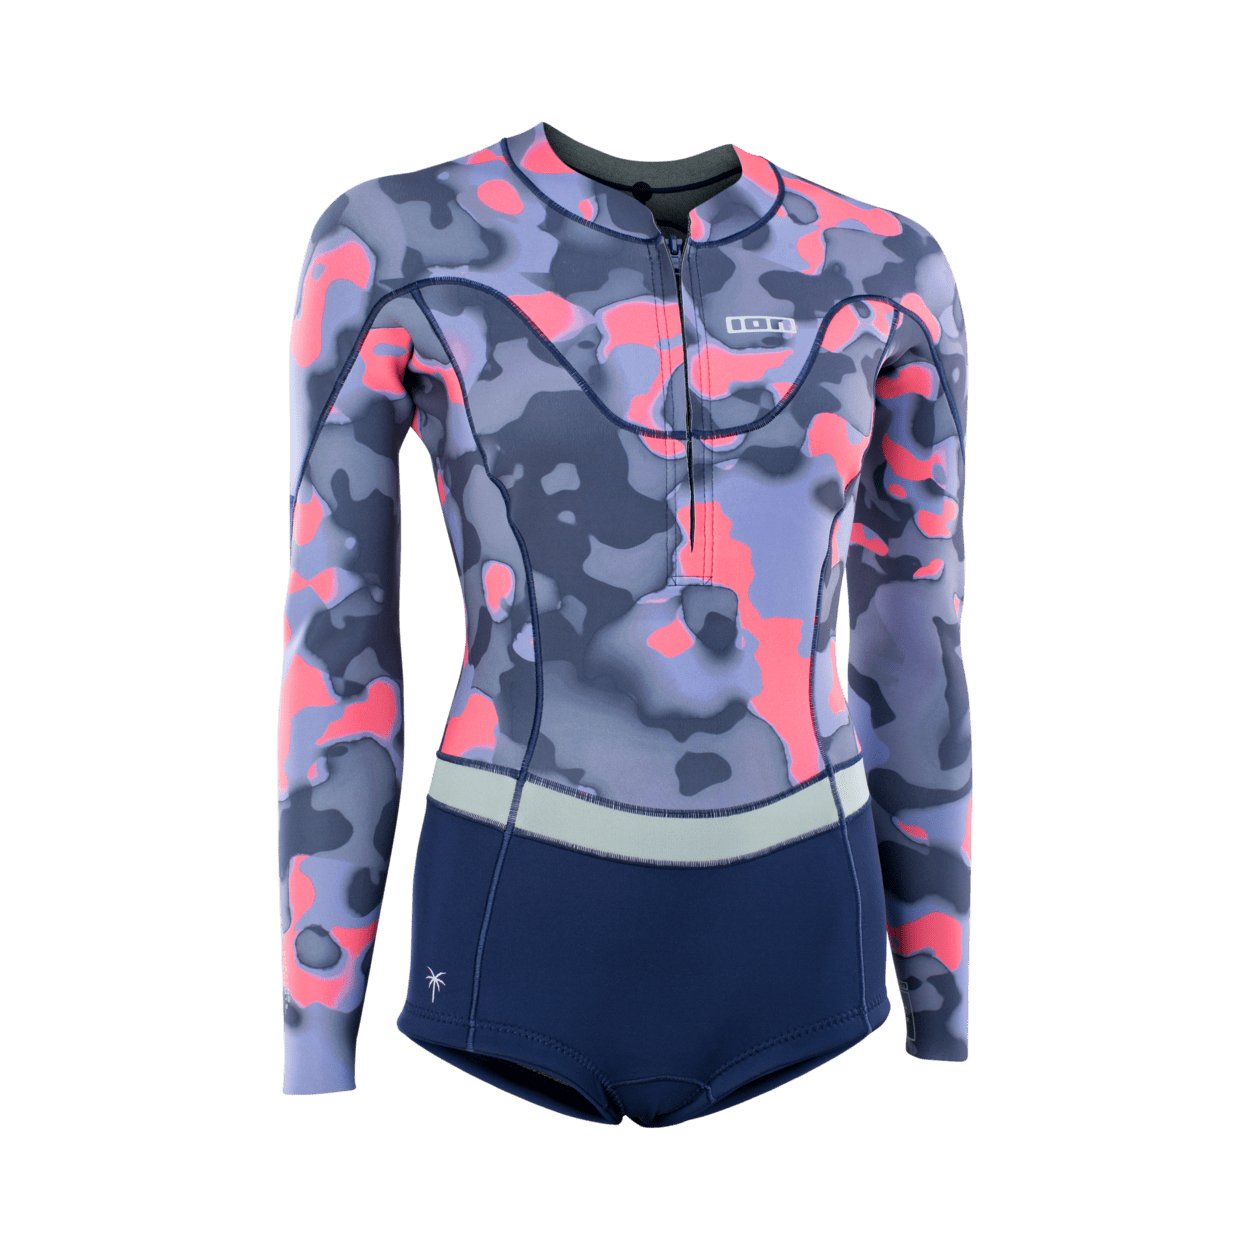 ION Women Wetsuit Amaze Hot Shorty 1.5 Longsleeve Front Zip 2023 - Worthing Watersports - 9010583058306 - Wetsuits - ION Water